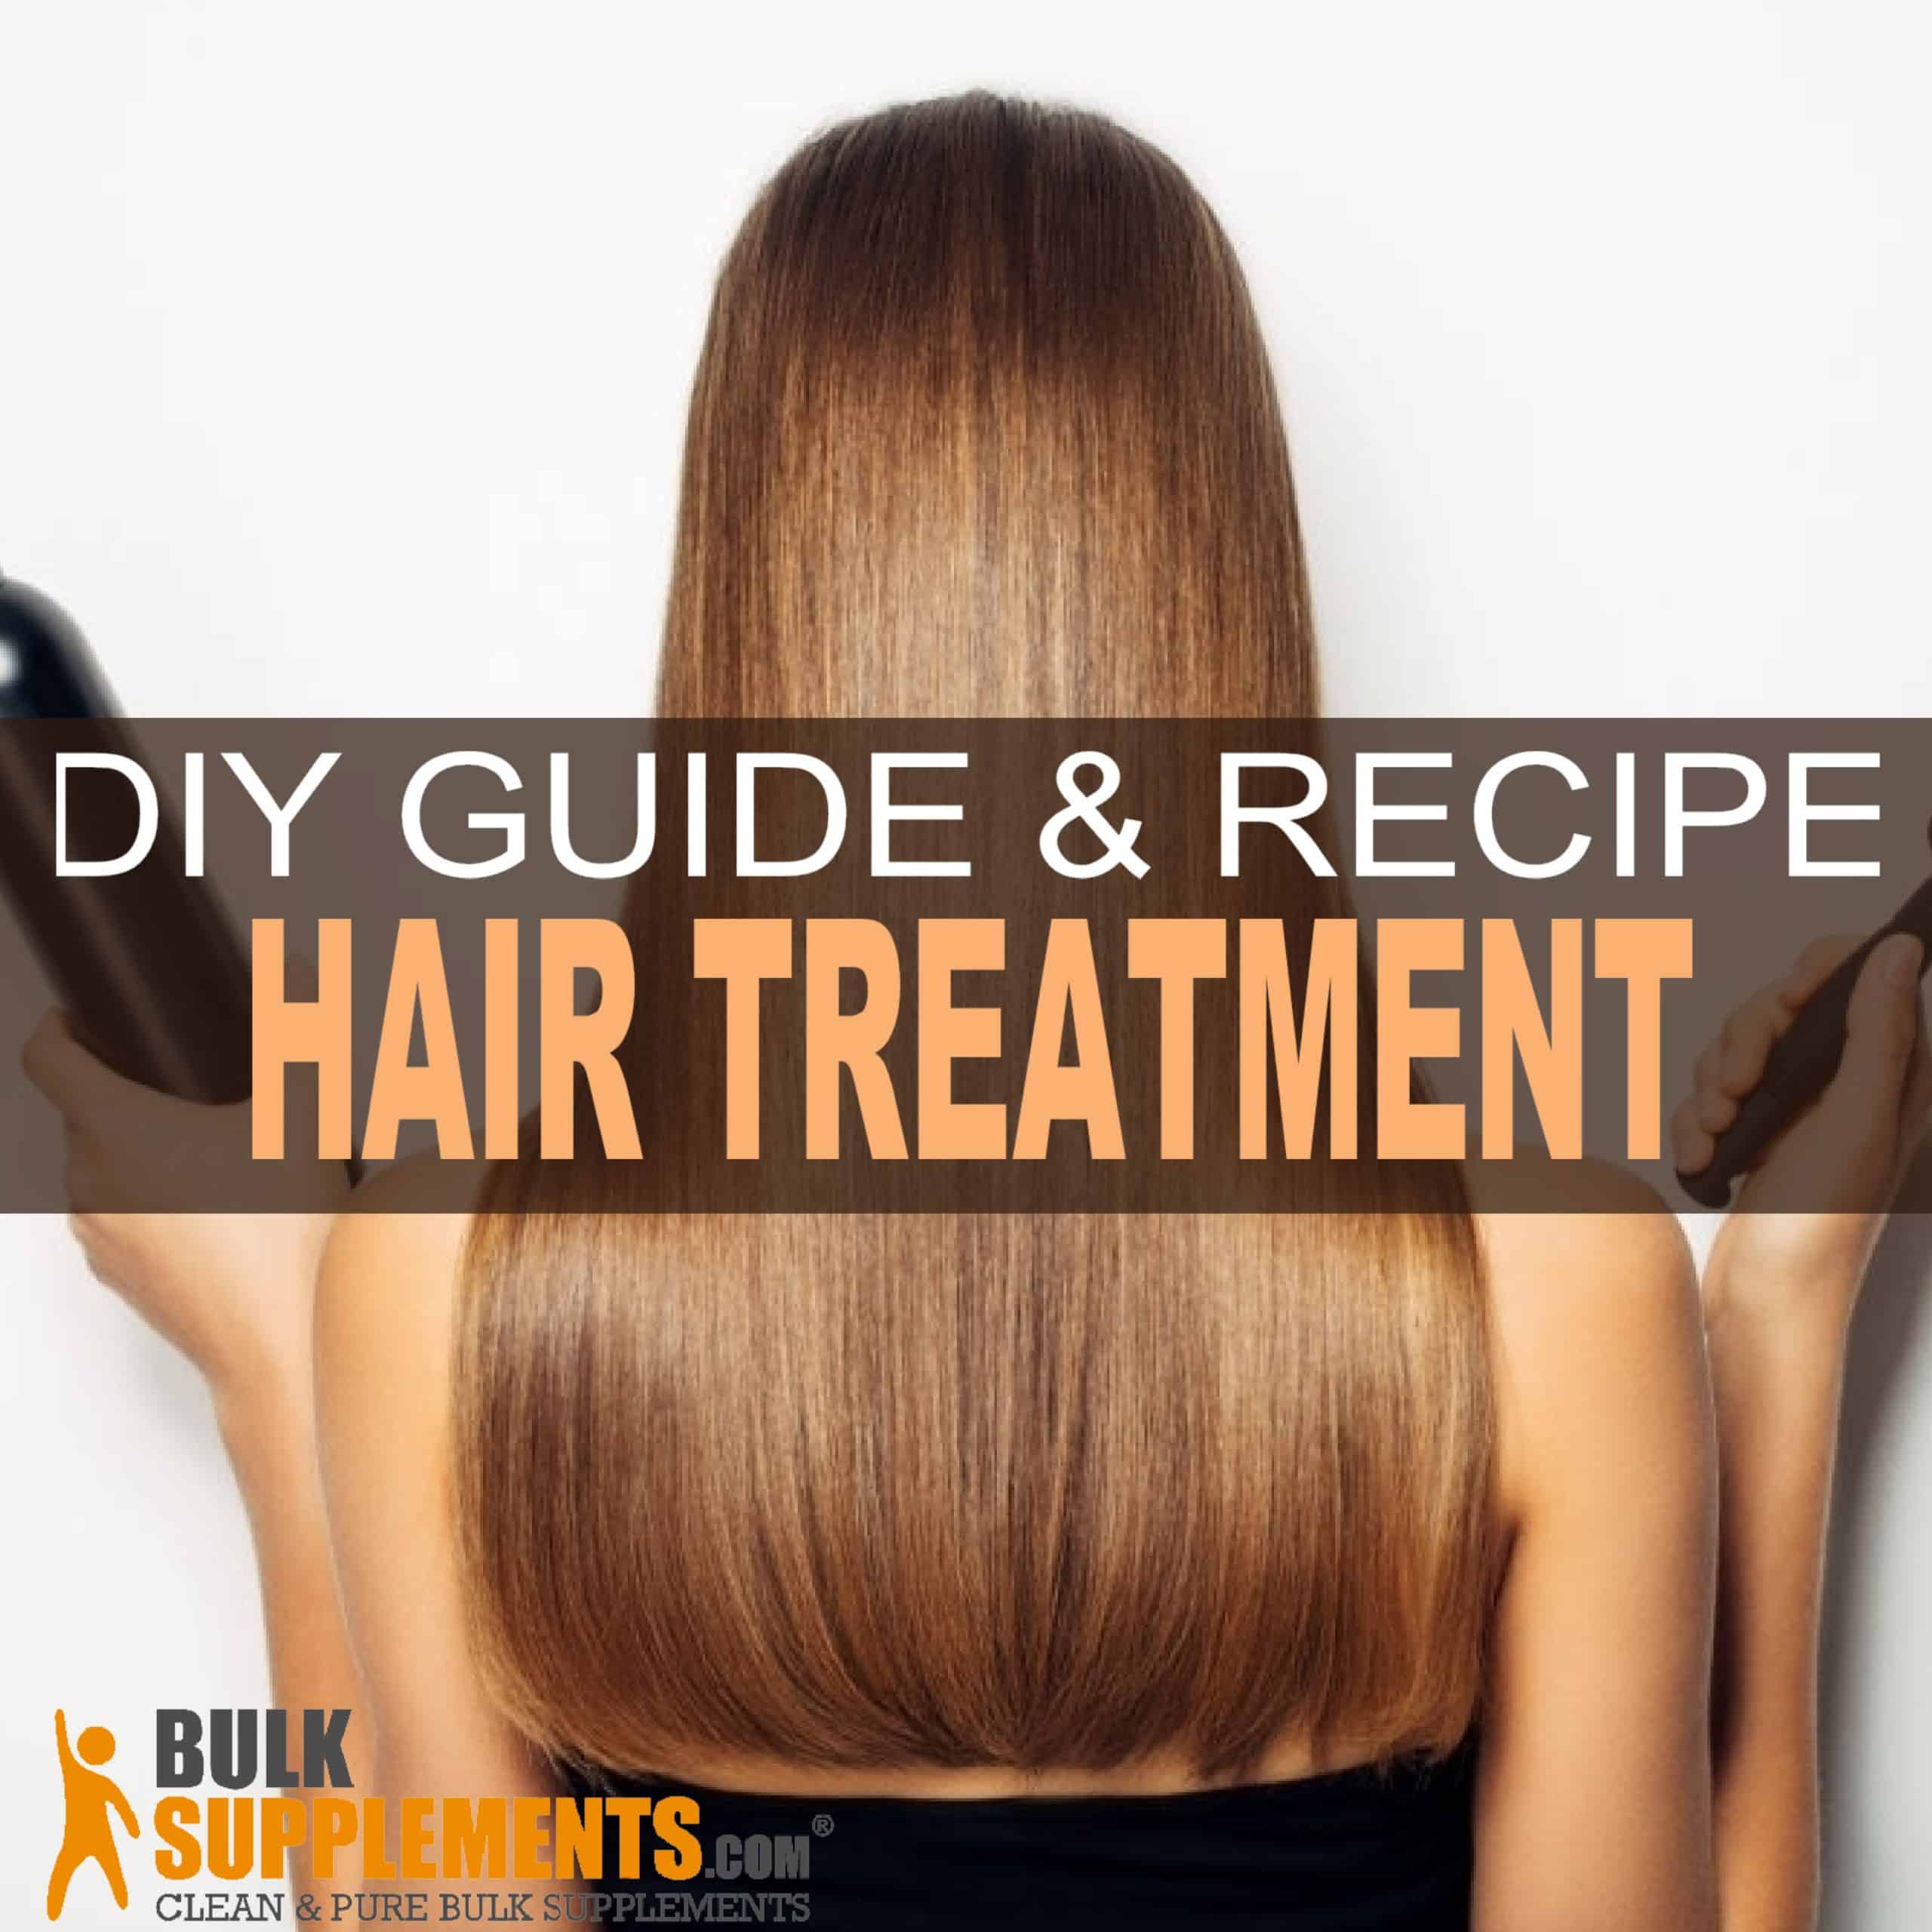 DIY Hair Strengthening Treatment: Ditch the Chemicals & Go Natural!